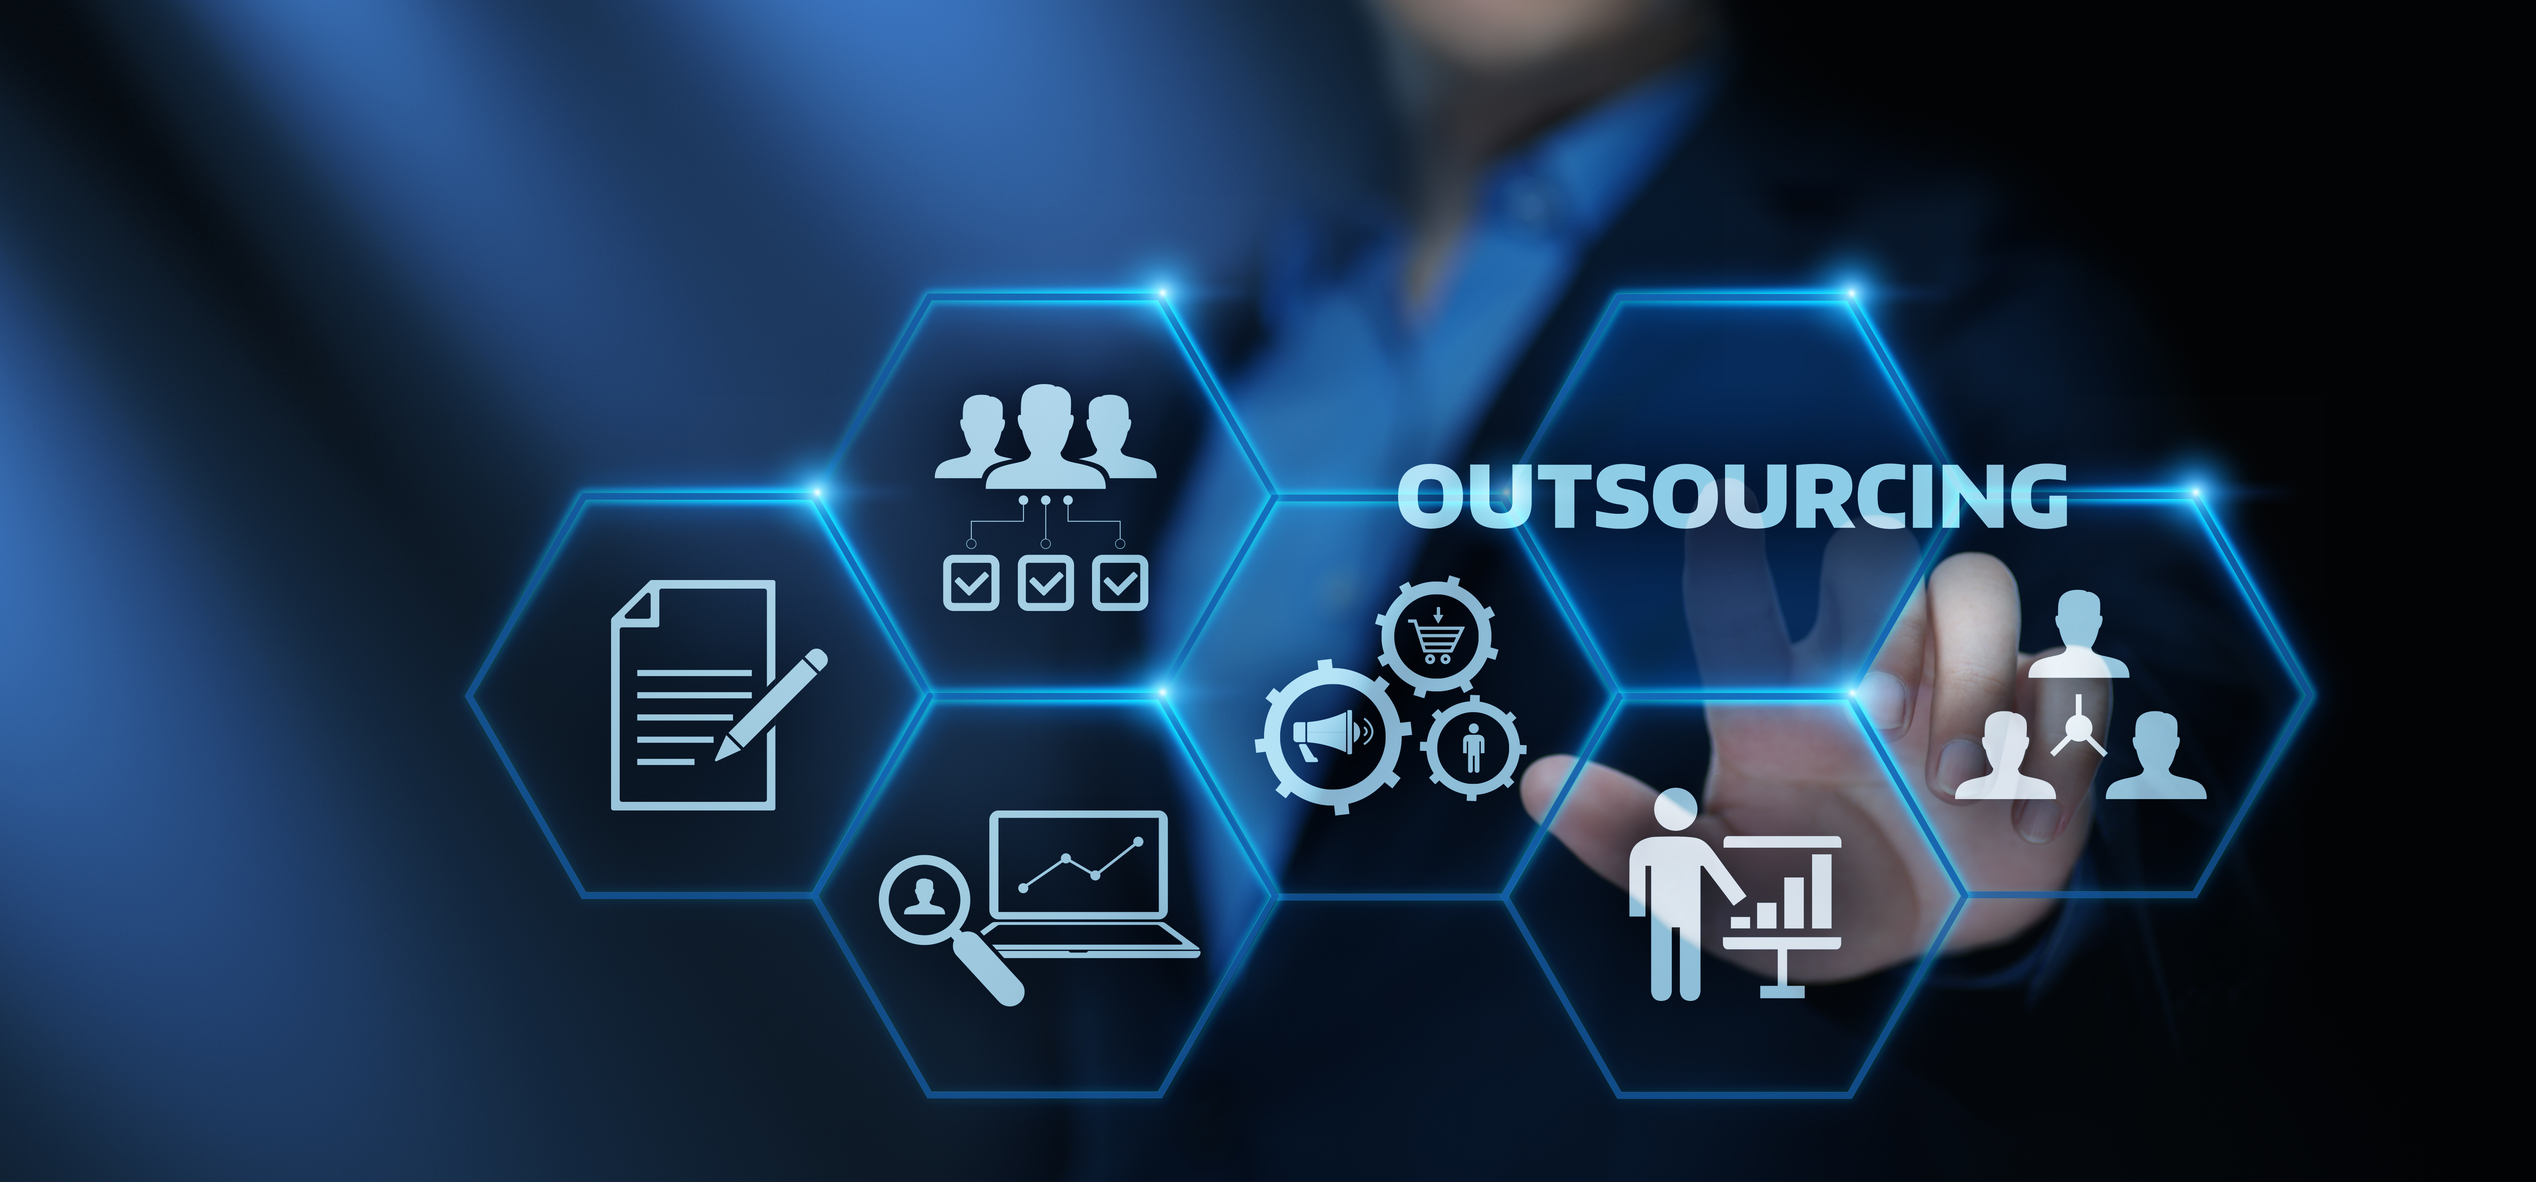 Outsourcing Human Resources Business Internet Technology Concept.